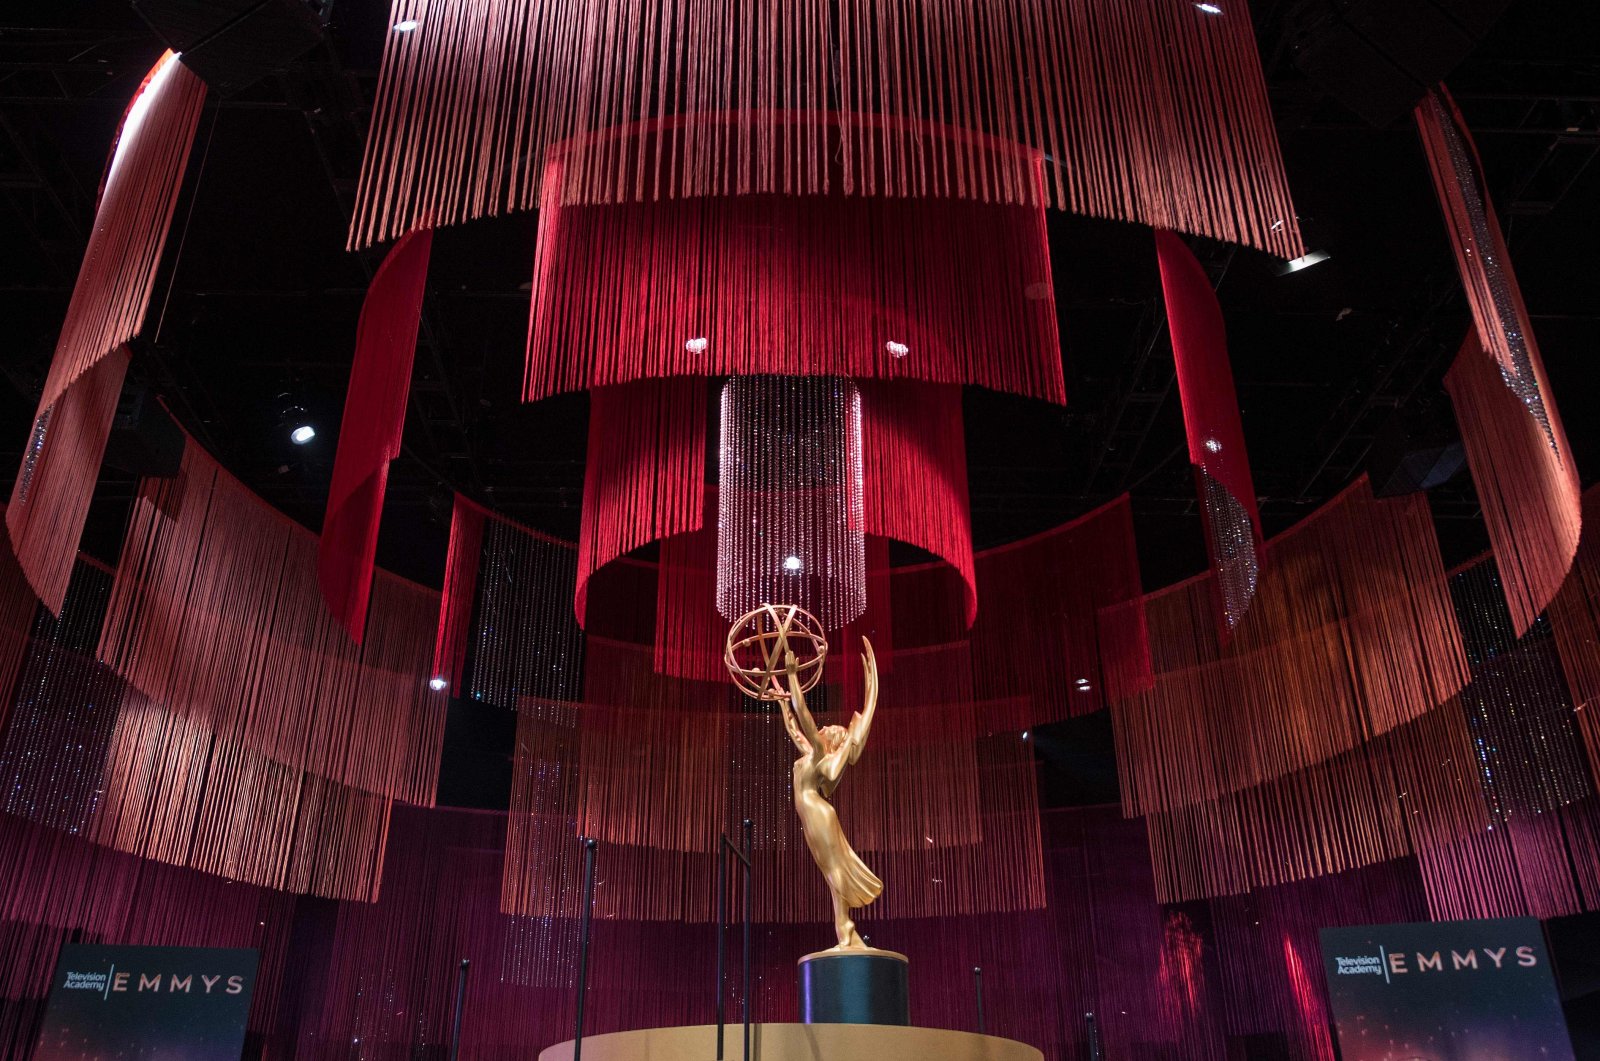 In this Sept. 12, 2019, file photo, an Emmy statue is seen on the stage at the 71st Emmy Awards Governors Ball press preview at LA Live in Los Angeles. (AFP Photo)